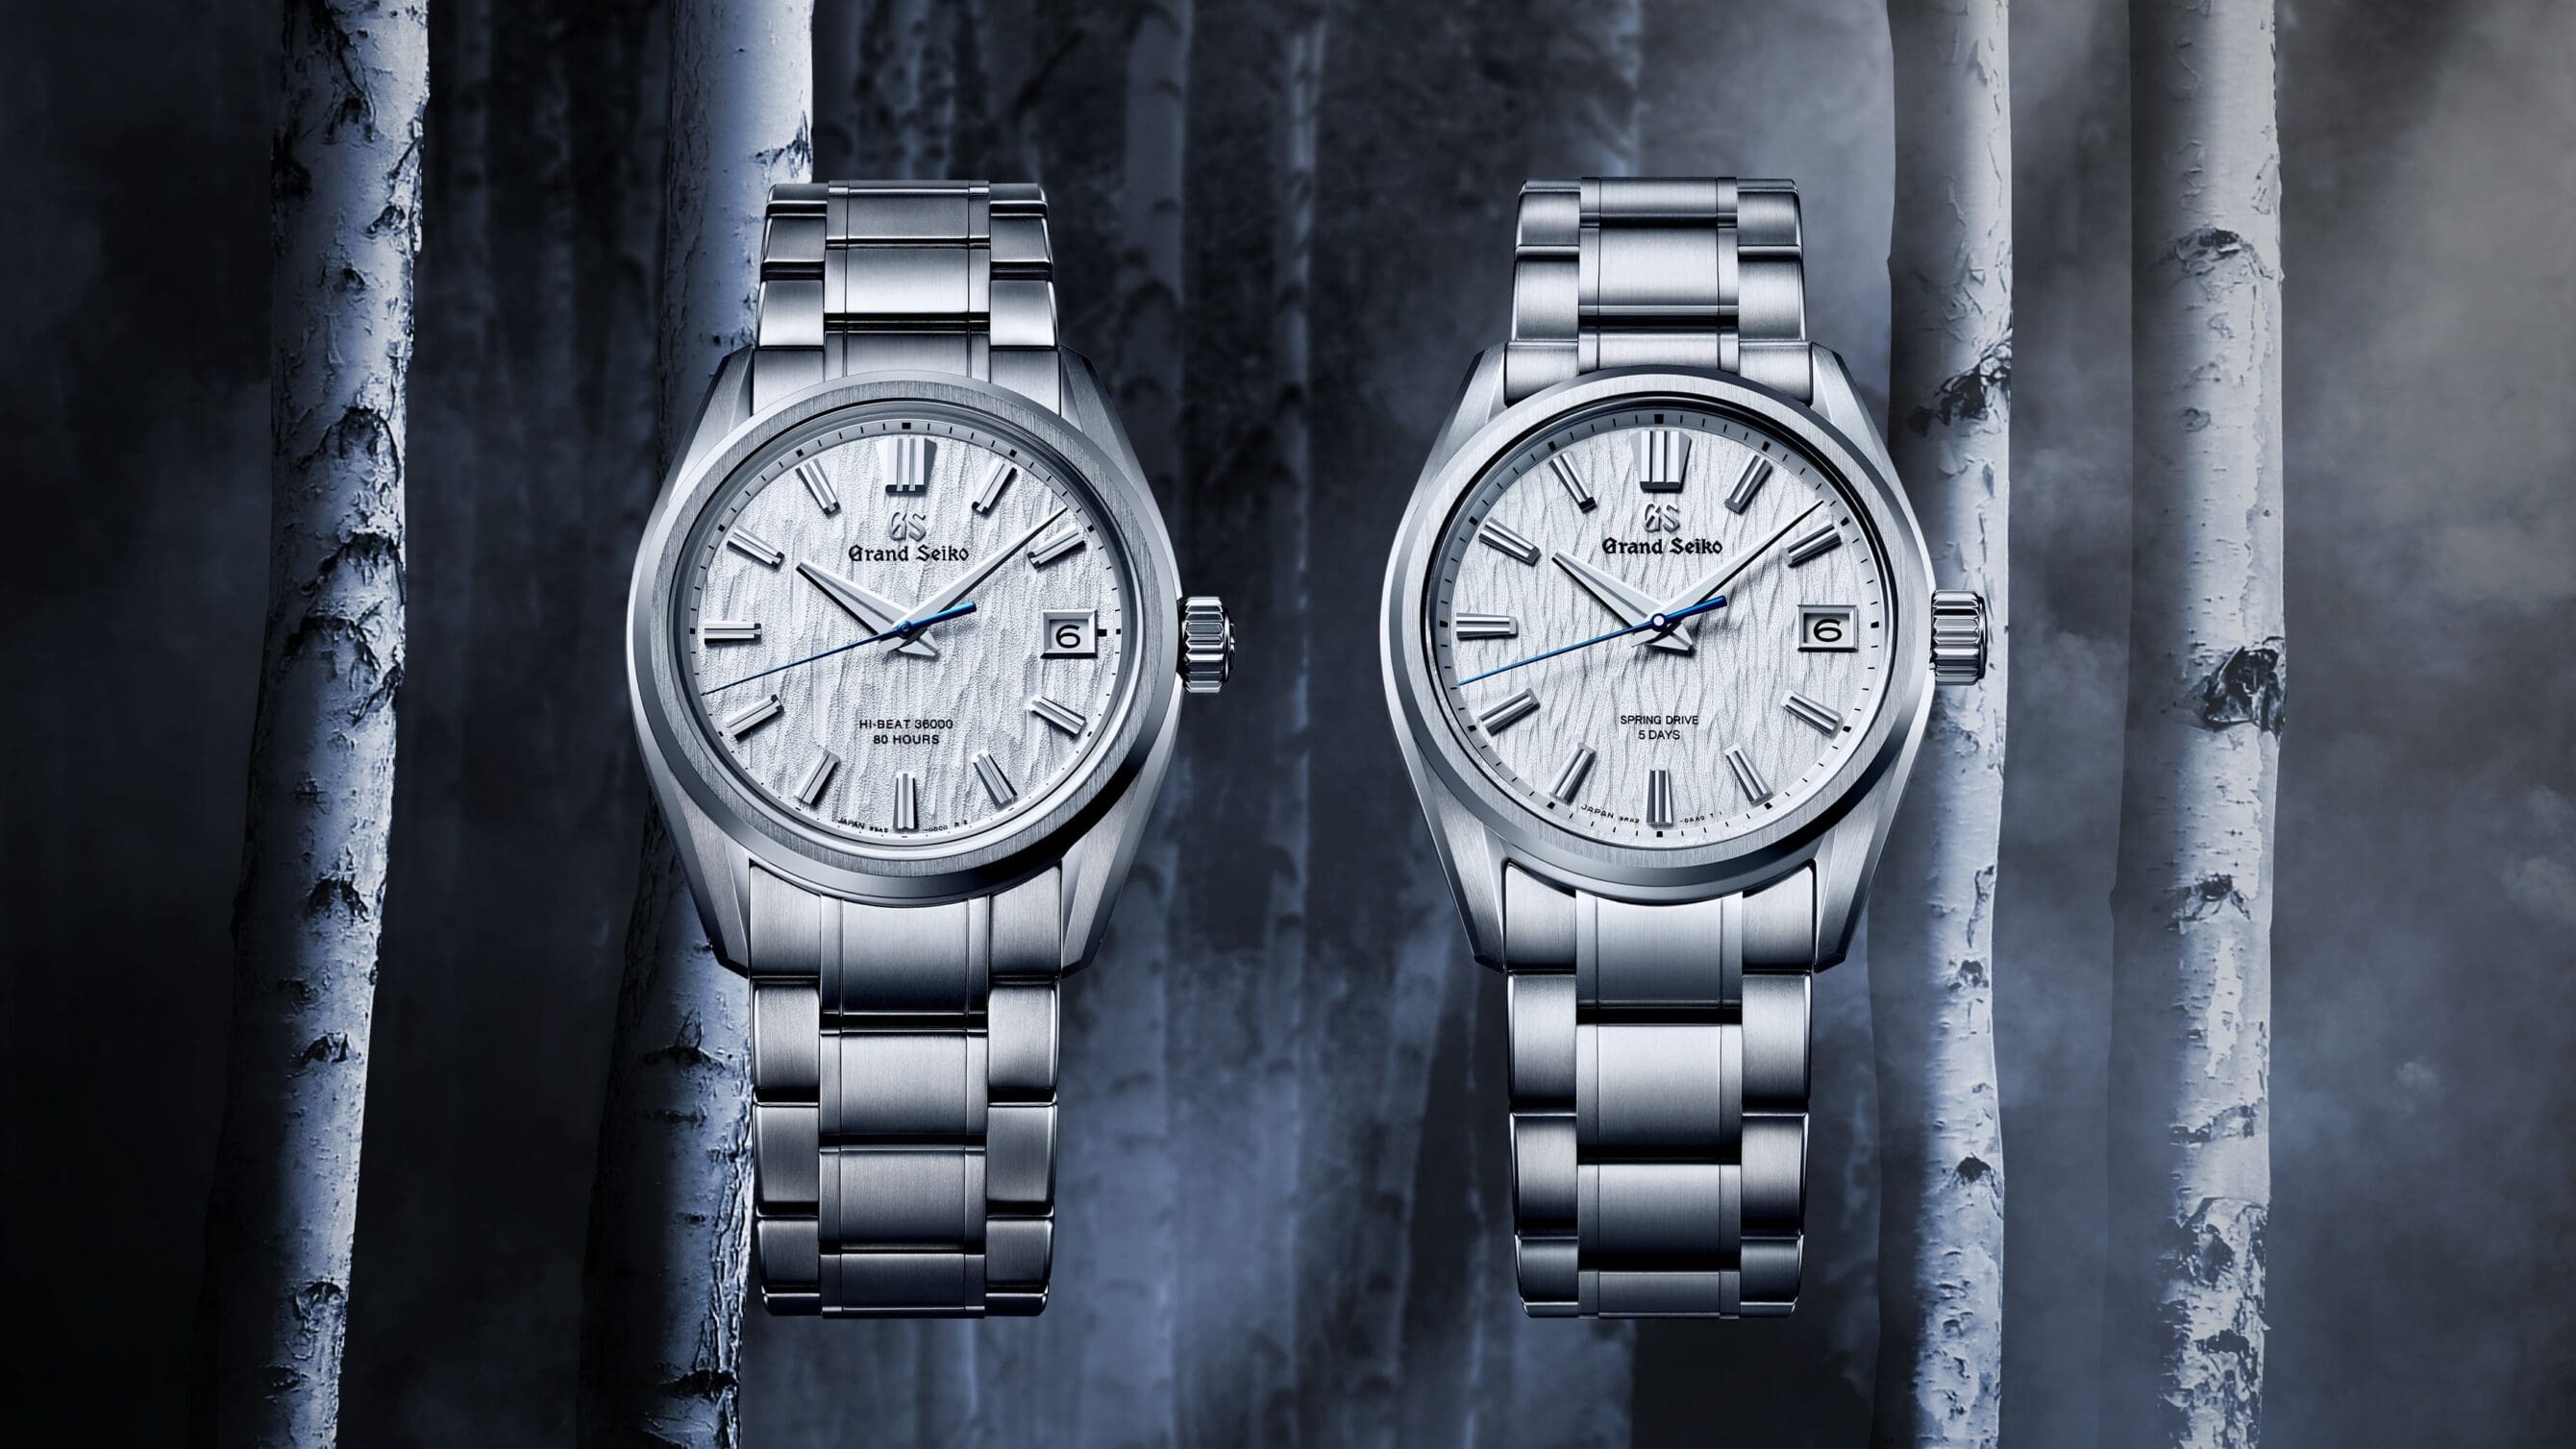 What are the differences between the Grand Seiko SLGA009 and SLGH005 “White Birch” watches?